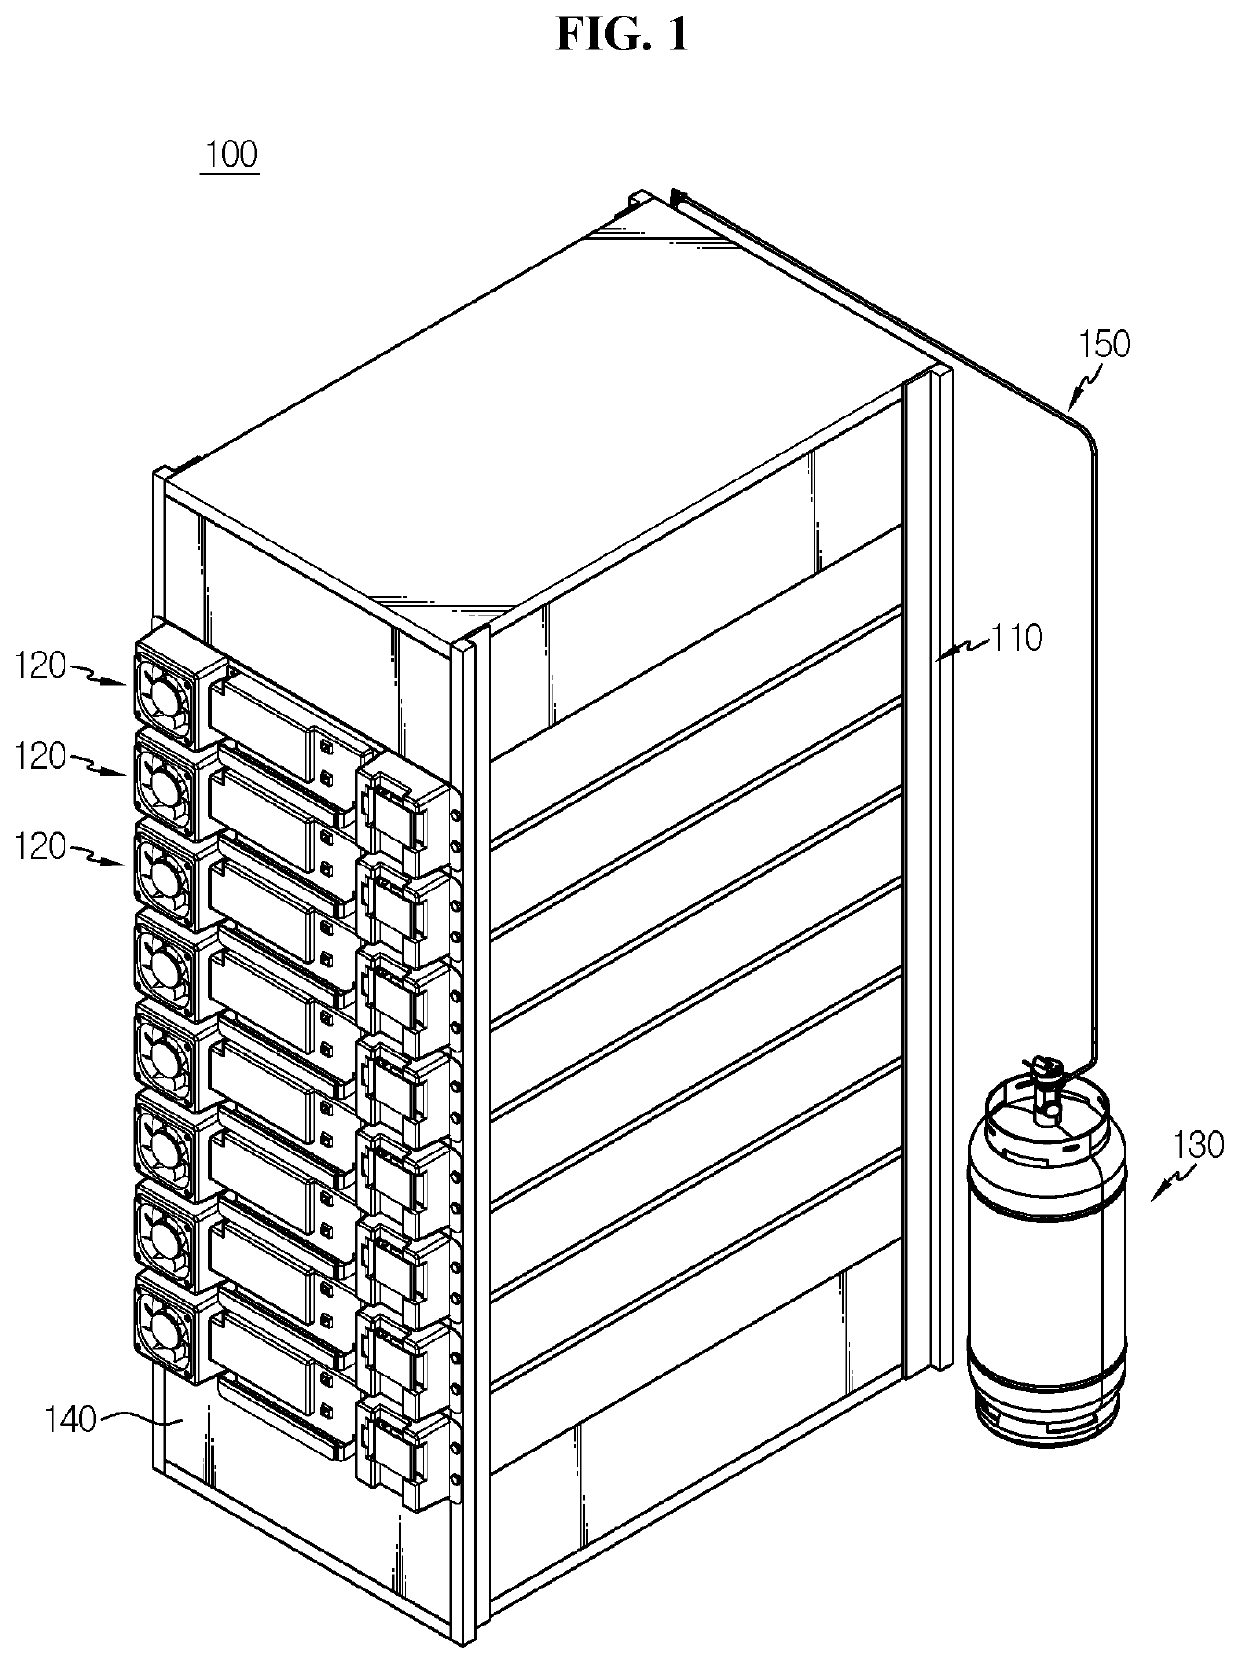 Battery module having structure capable of delaying outflow of fire-fighting water injected therein in case of fire, and battery rack and energy storage device comprising same